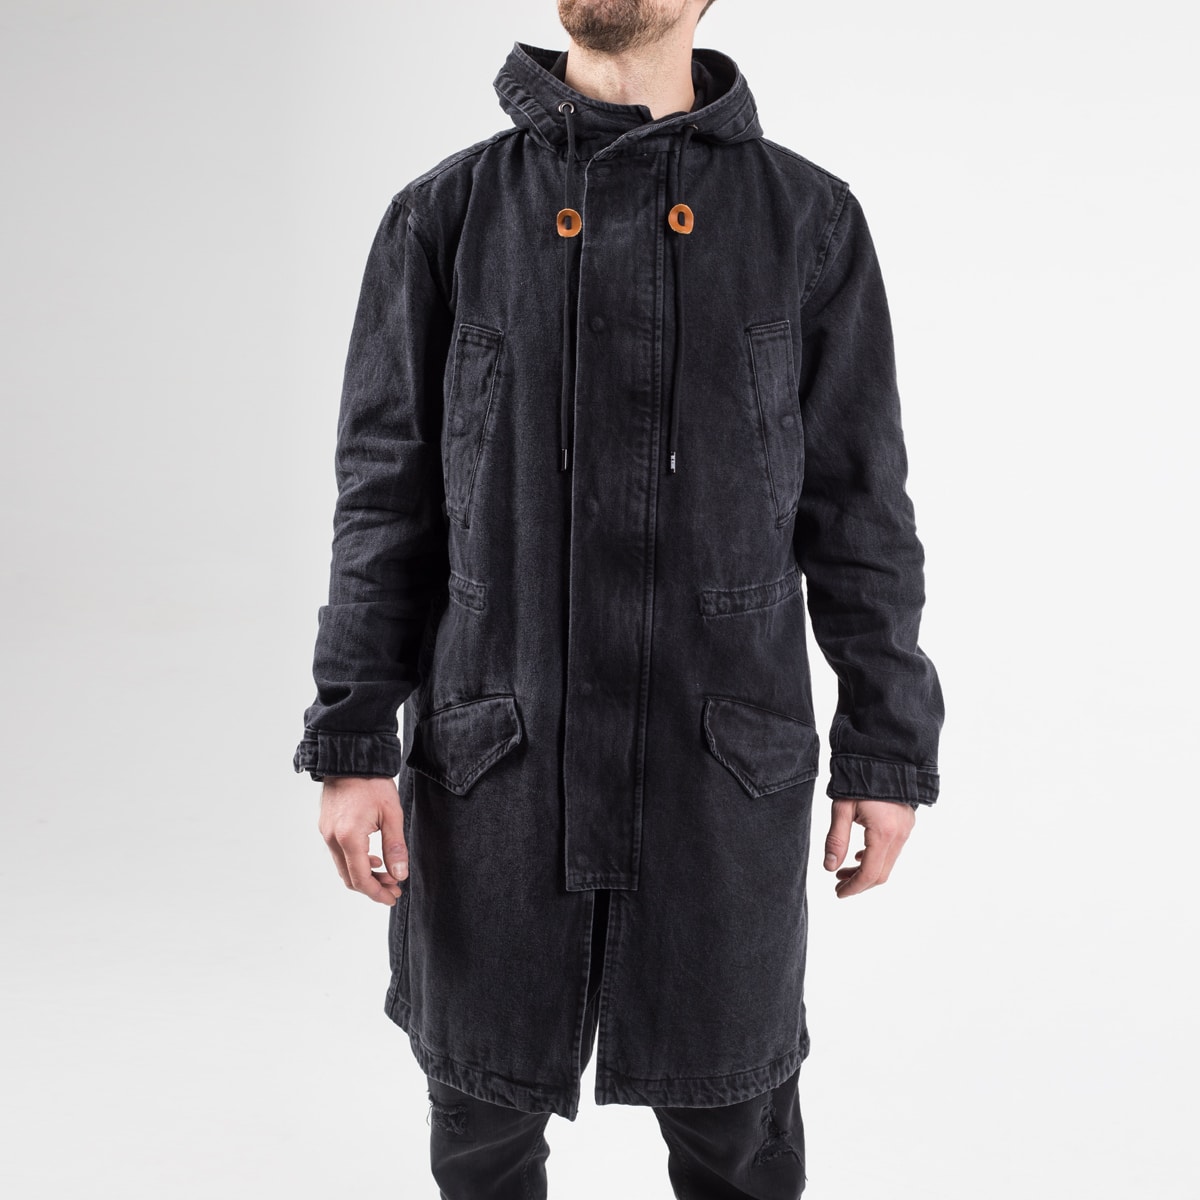 Parka 3/4 Jeans Black - DCjeans saroual and clothing